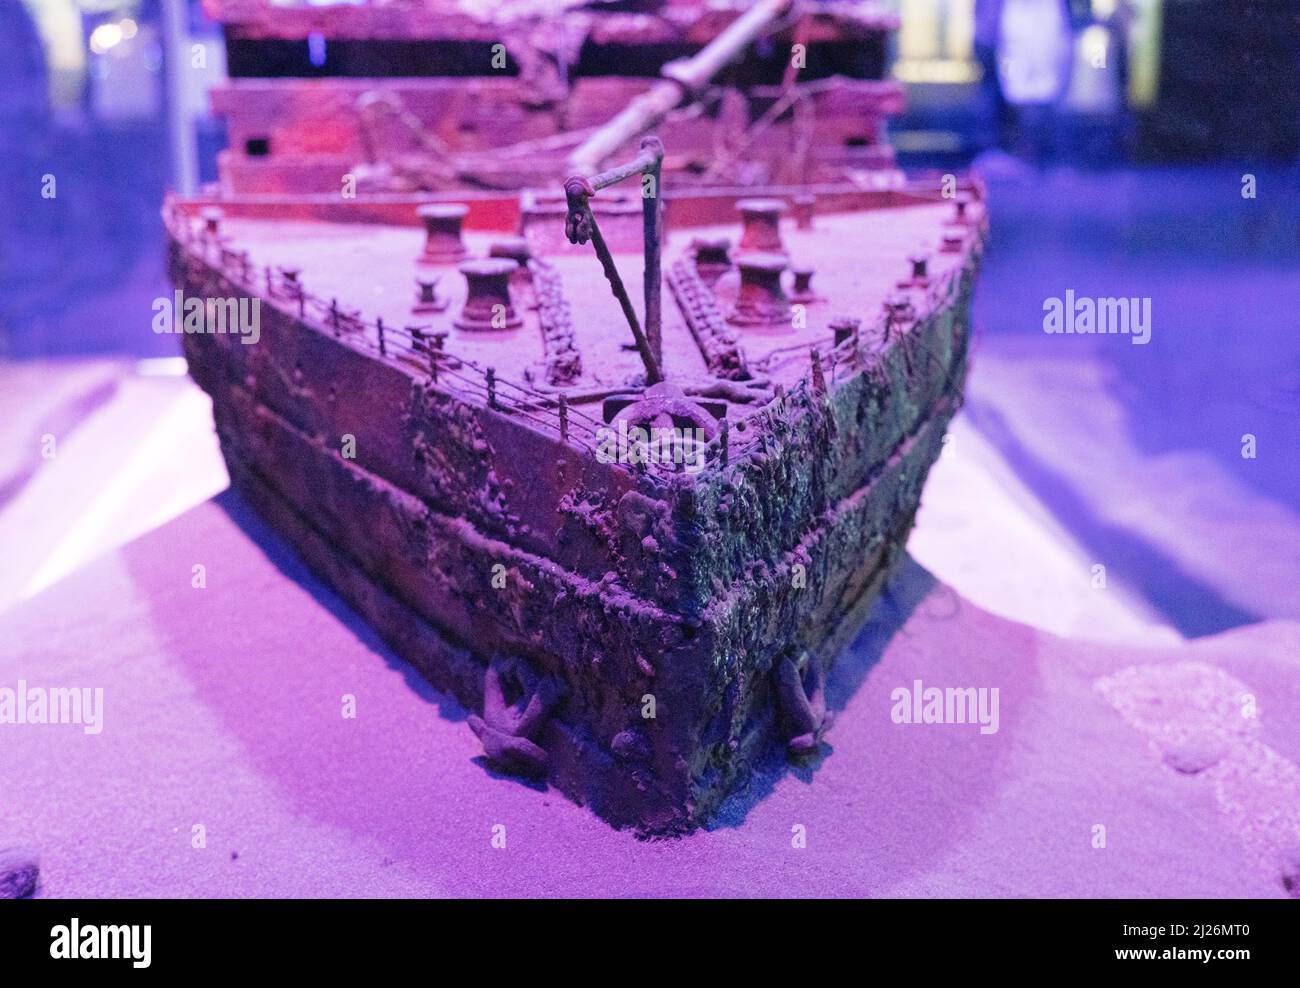 The Titanic sinking; Model of the RMS Titanic wreck underwater on the seabed; the Titanic Exhibition, London UK Stock Photo